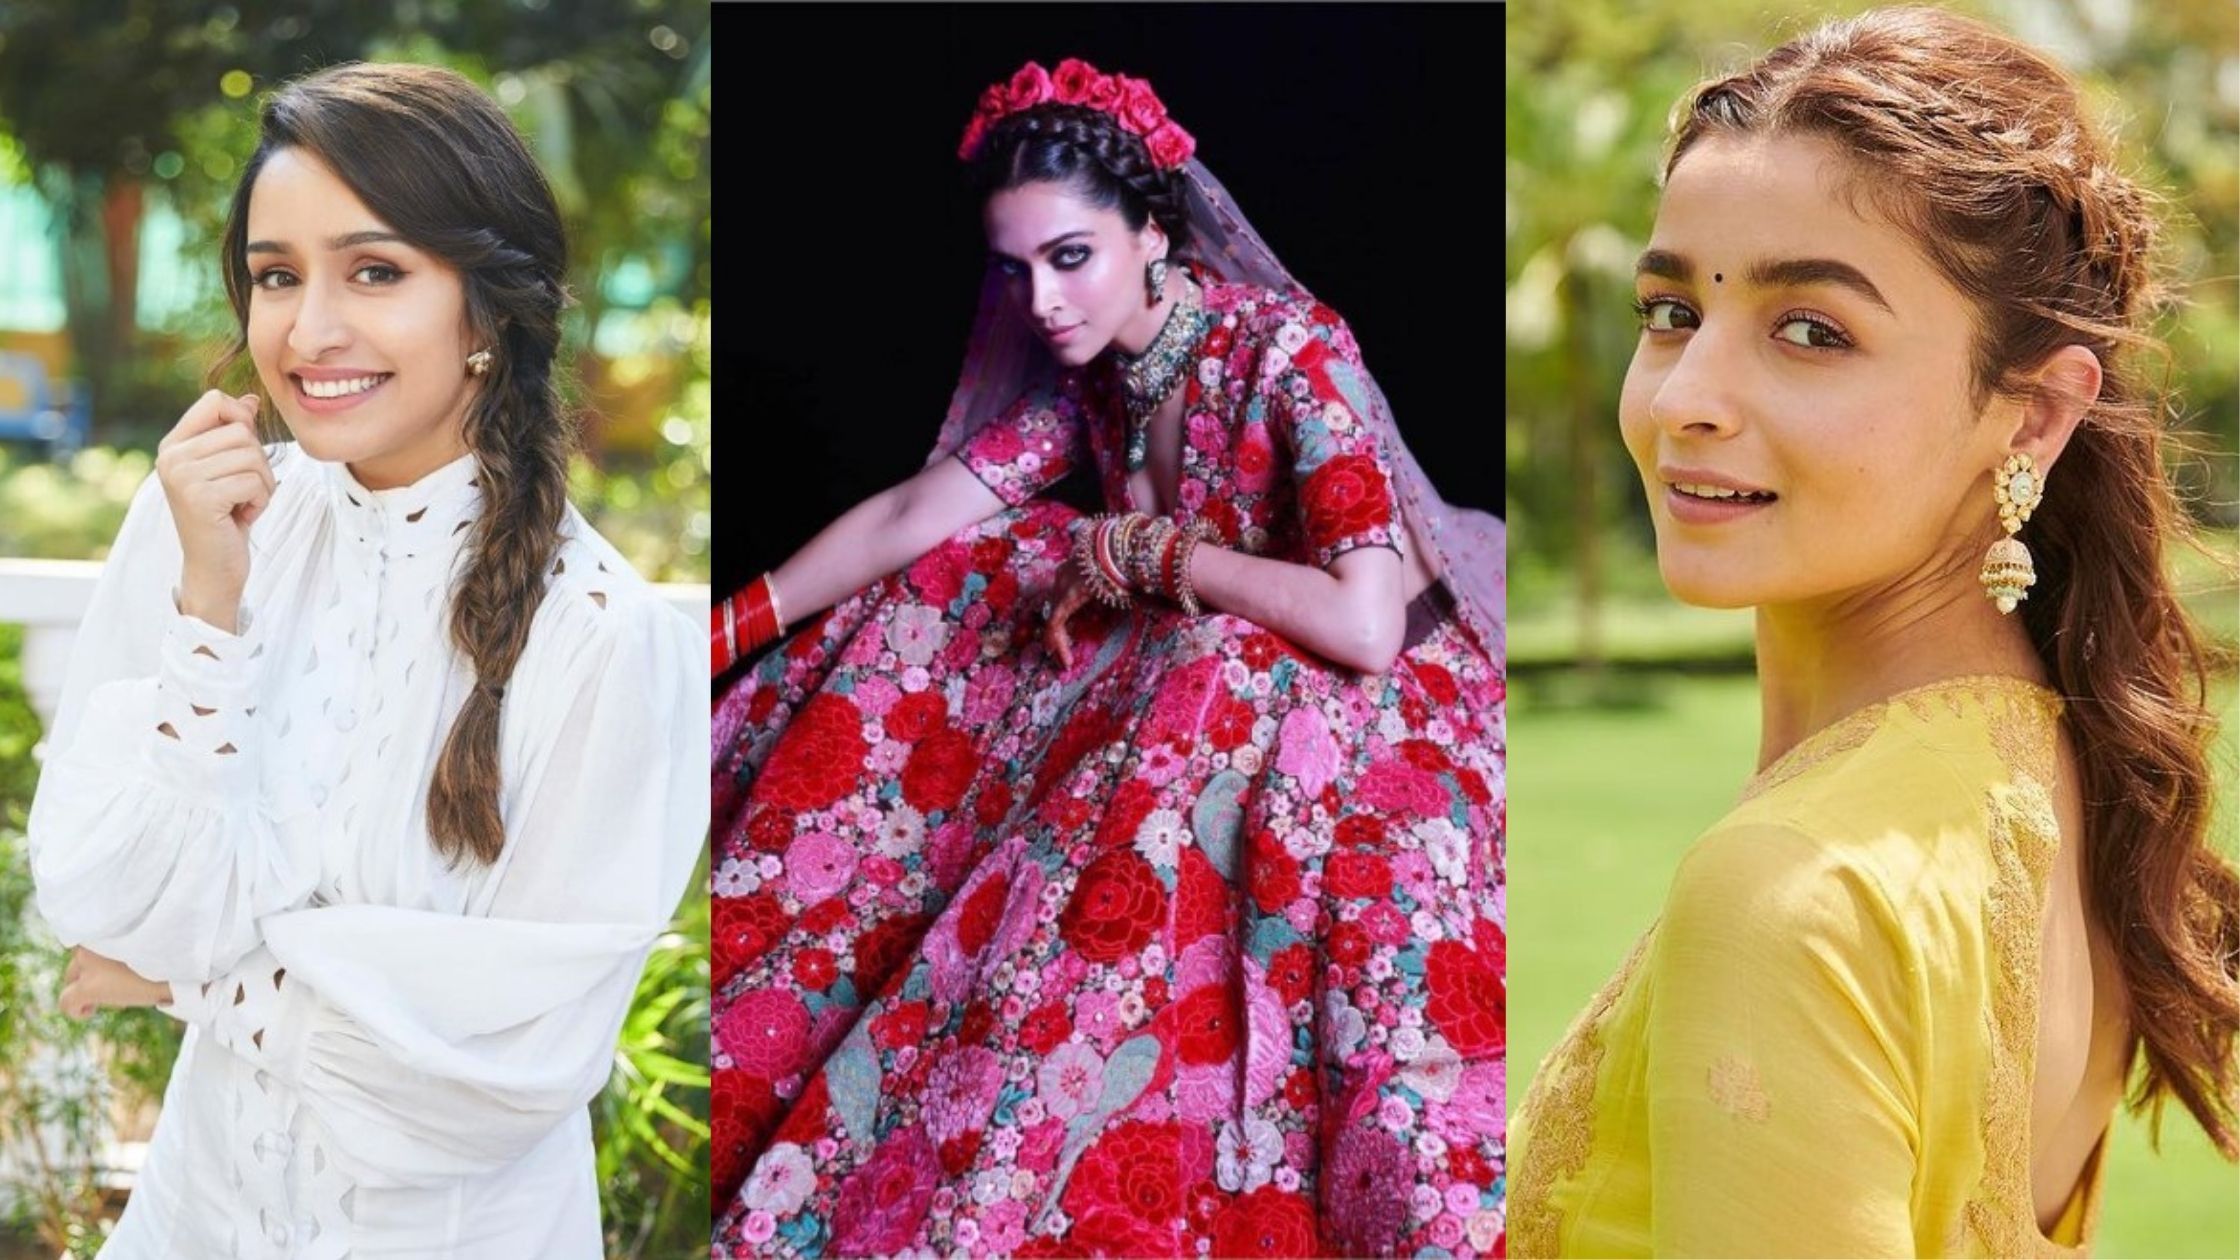 This wedding season, try these braid styles by Bollywood A-listers